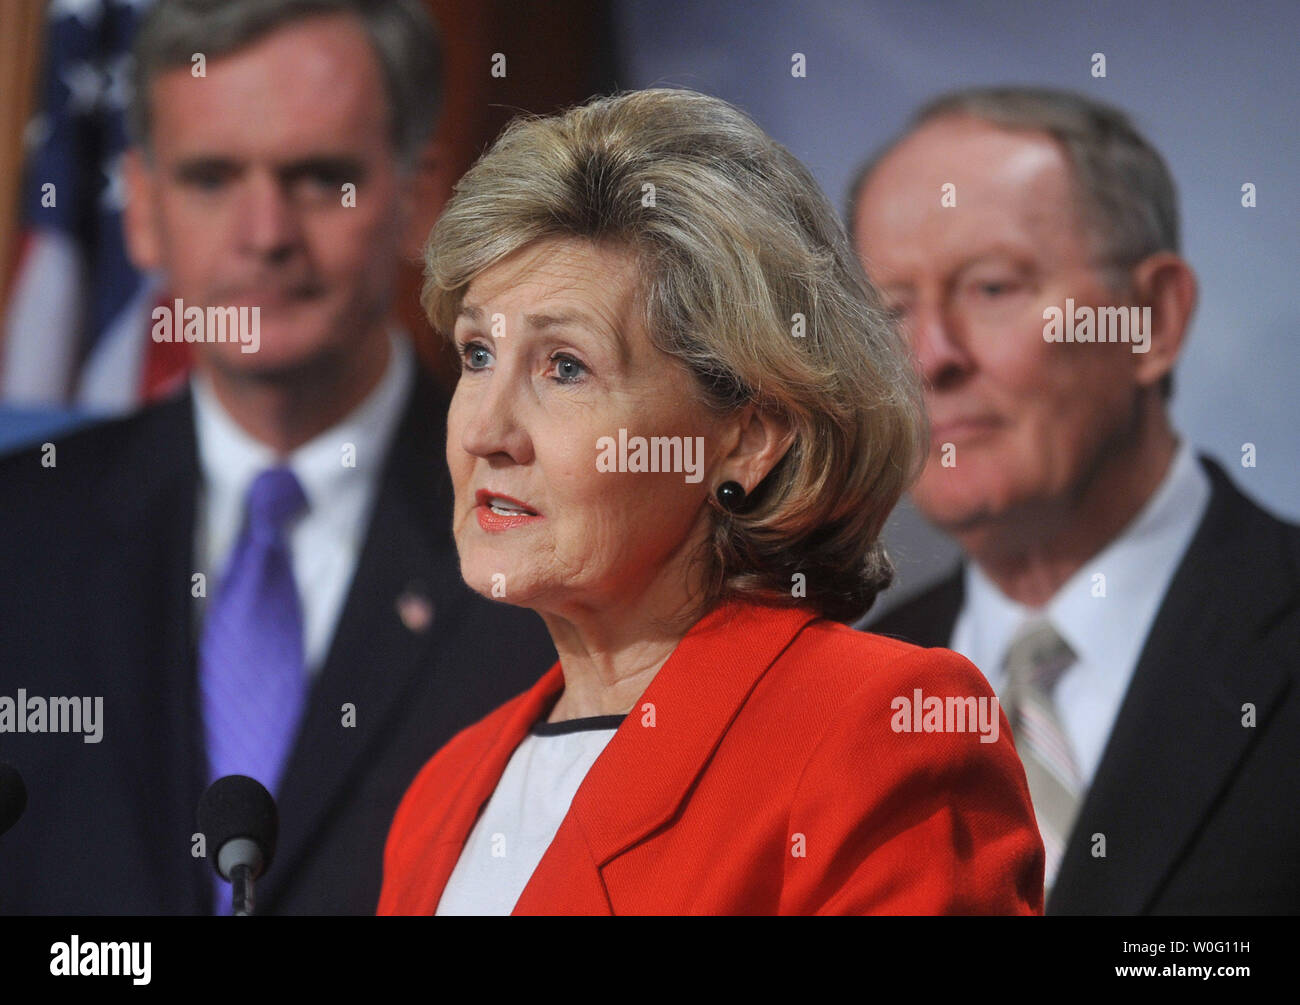 Sen. Kay Bailey Hutchison (R-TX) , joined by Sen. Judd Gregg (R-NH) (L) and Sen. Lamar Alexander (R-TN), speaks at a press conference on the Sessions-McCaskill spending freeze bill, on Capitol Hill in Washington on September 16, 2010.   UPI/Kevin Dietsch Stock Photo